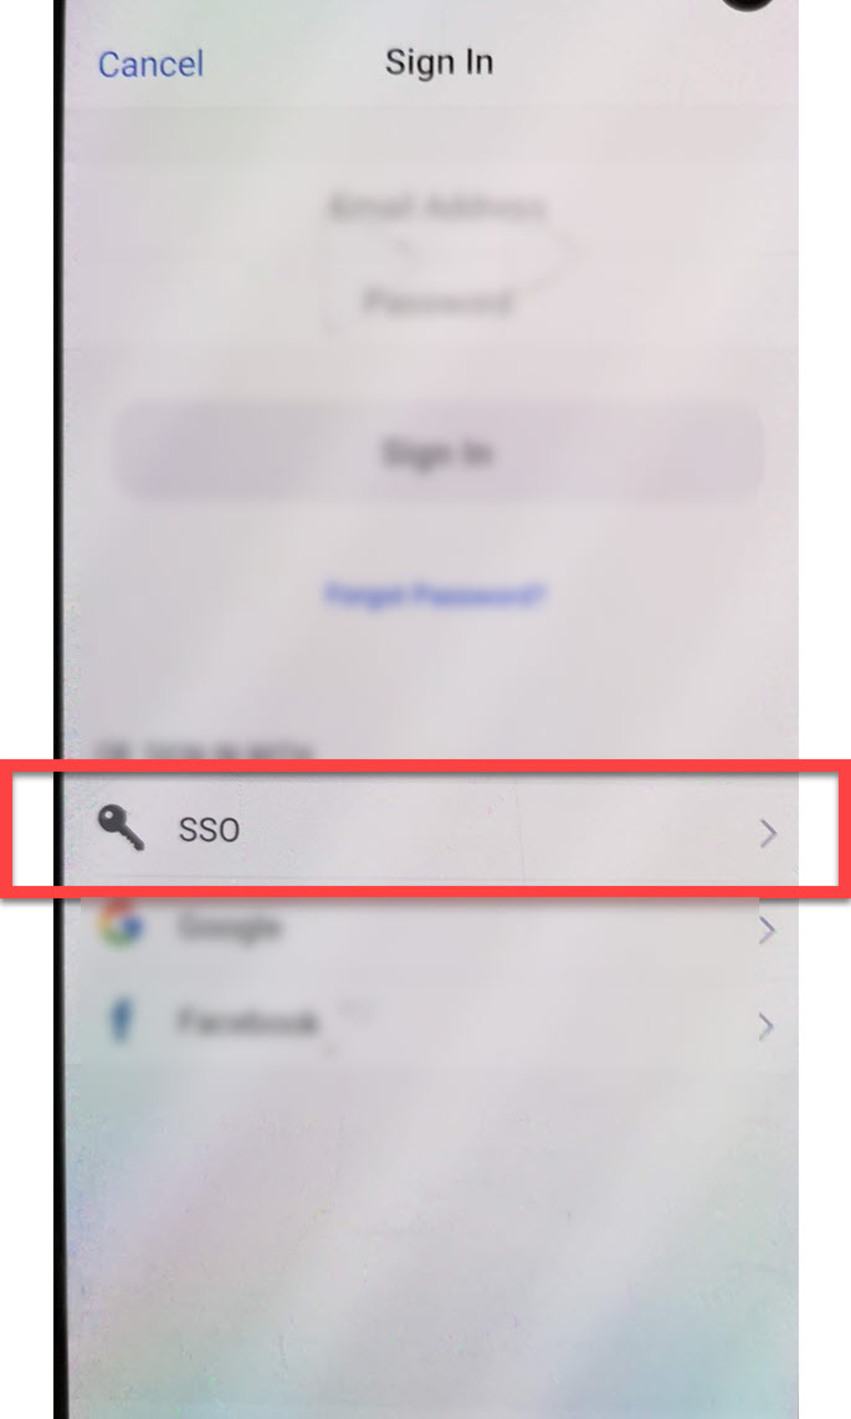 Login options with SSO highlighted